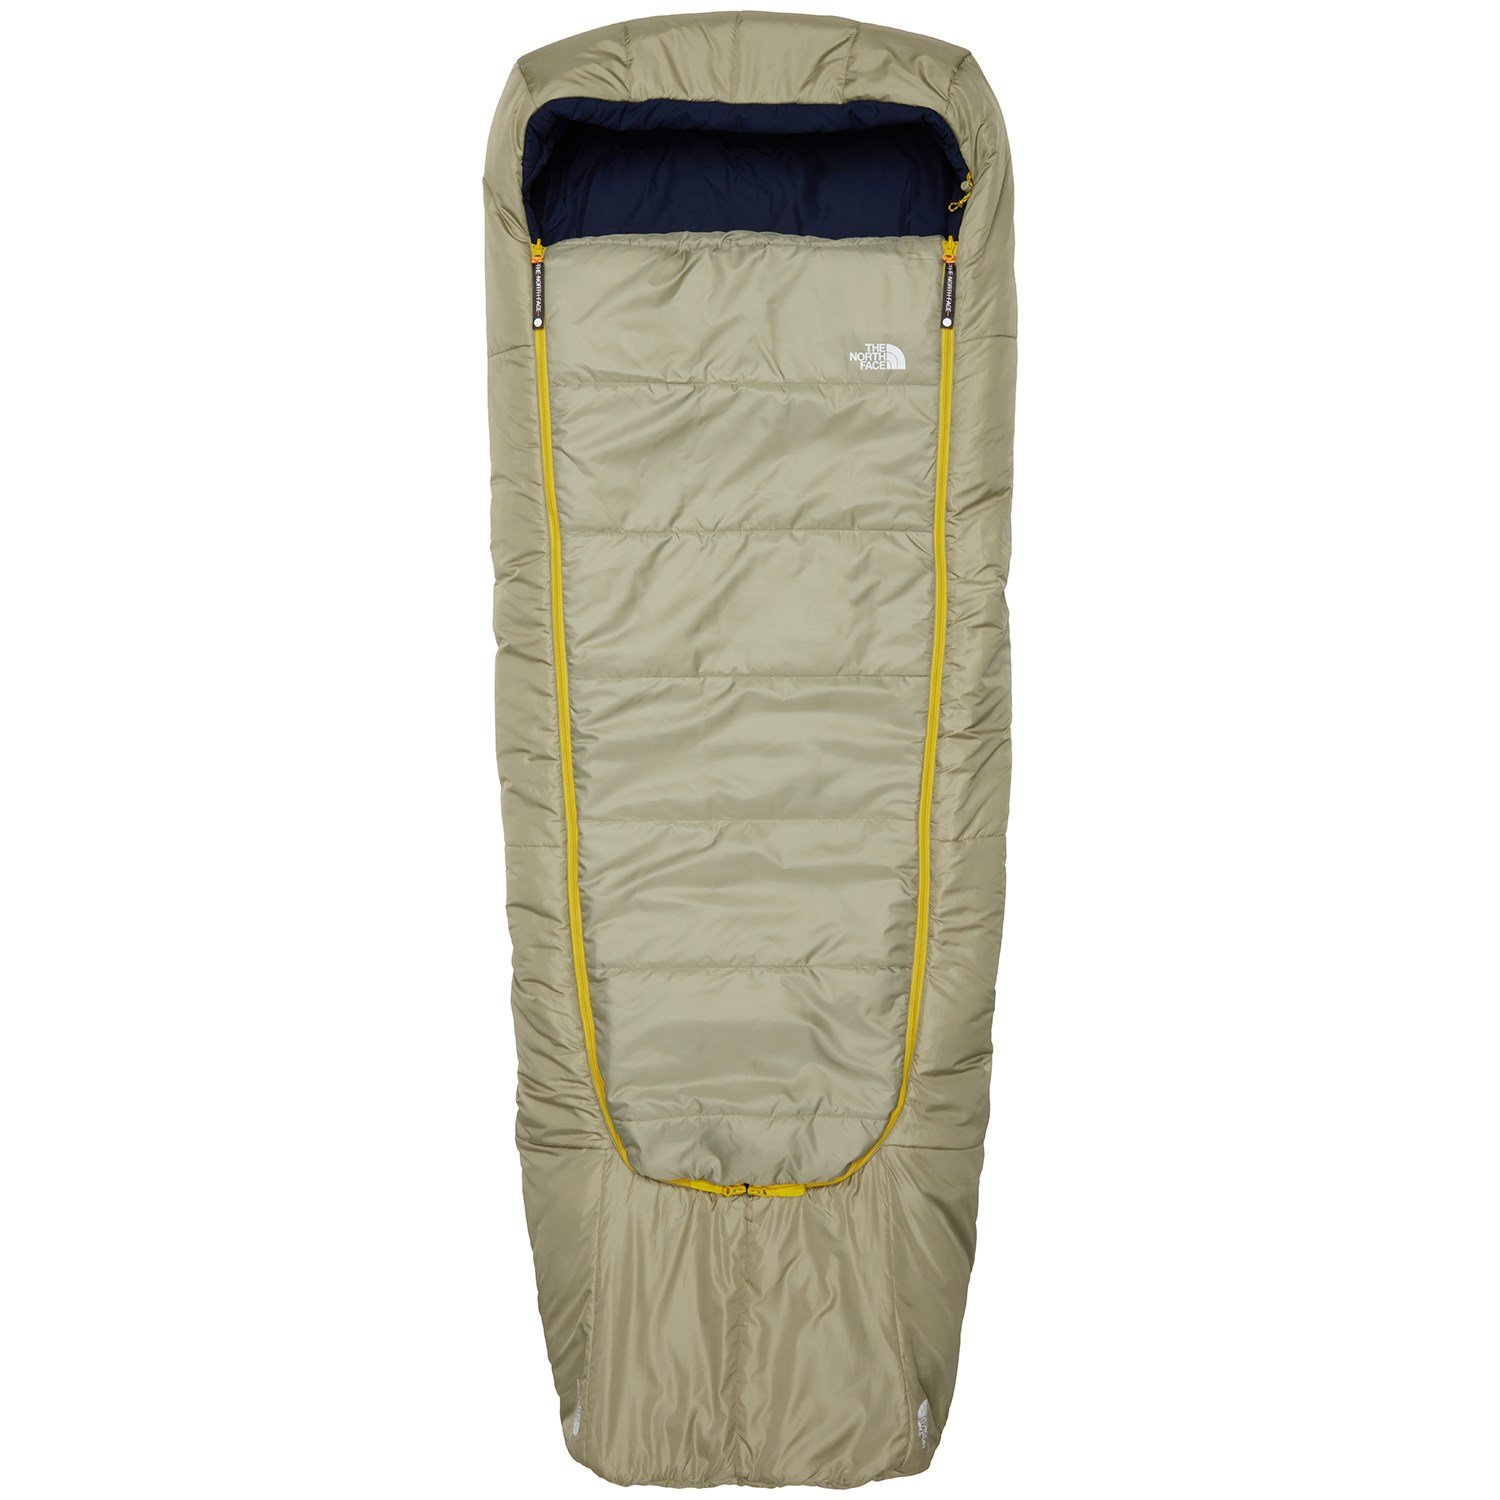 The North Face Dolomite One Sleeping Bag  REI Coop